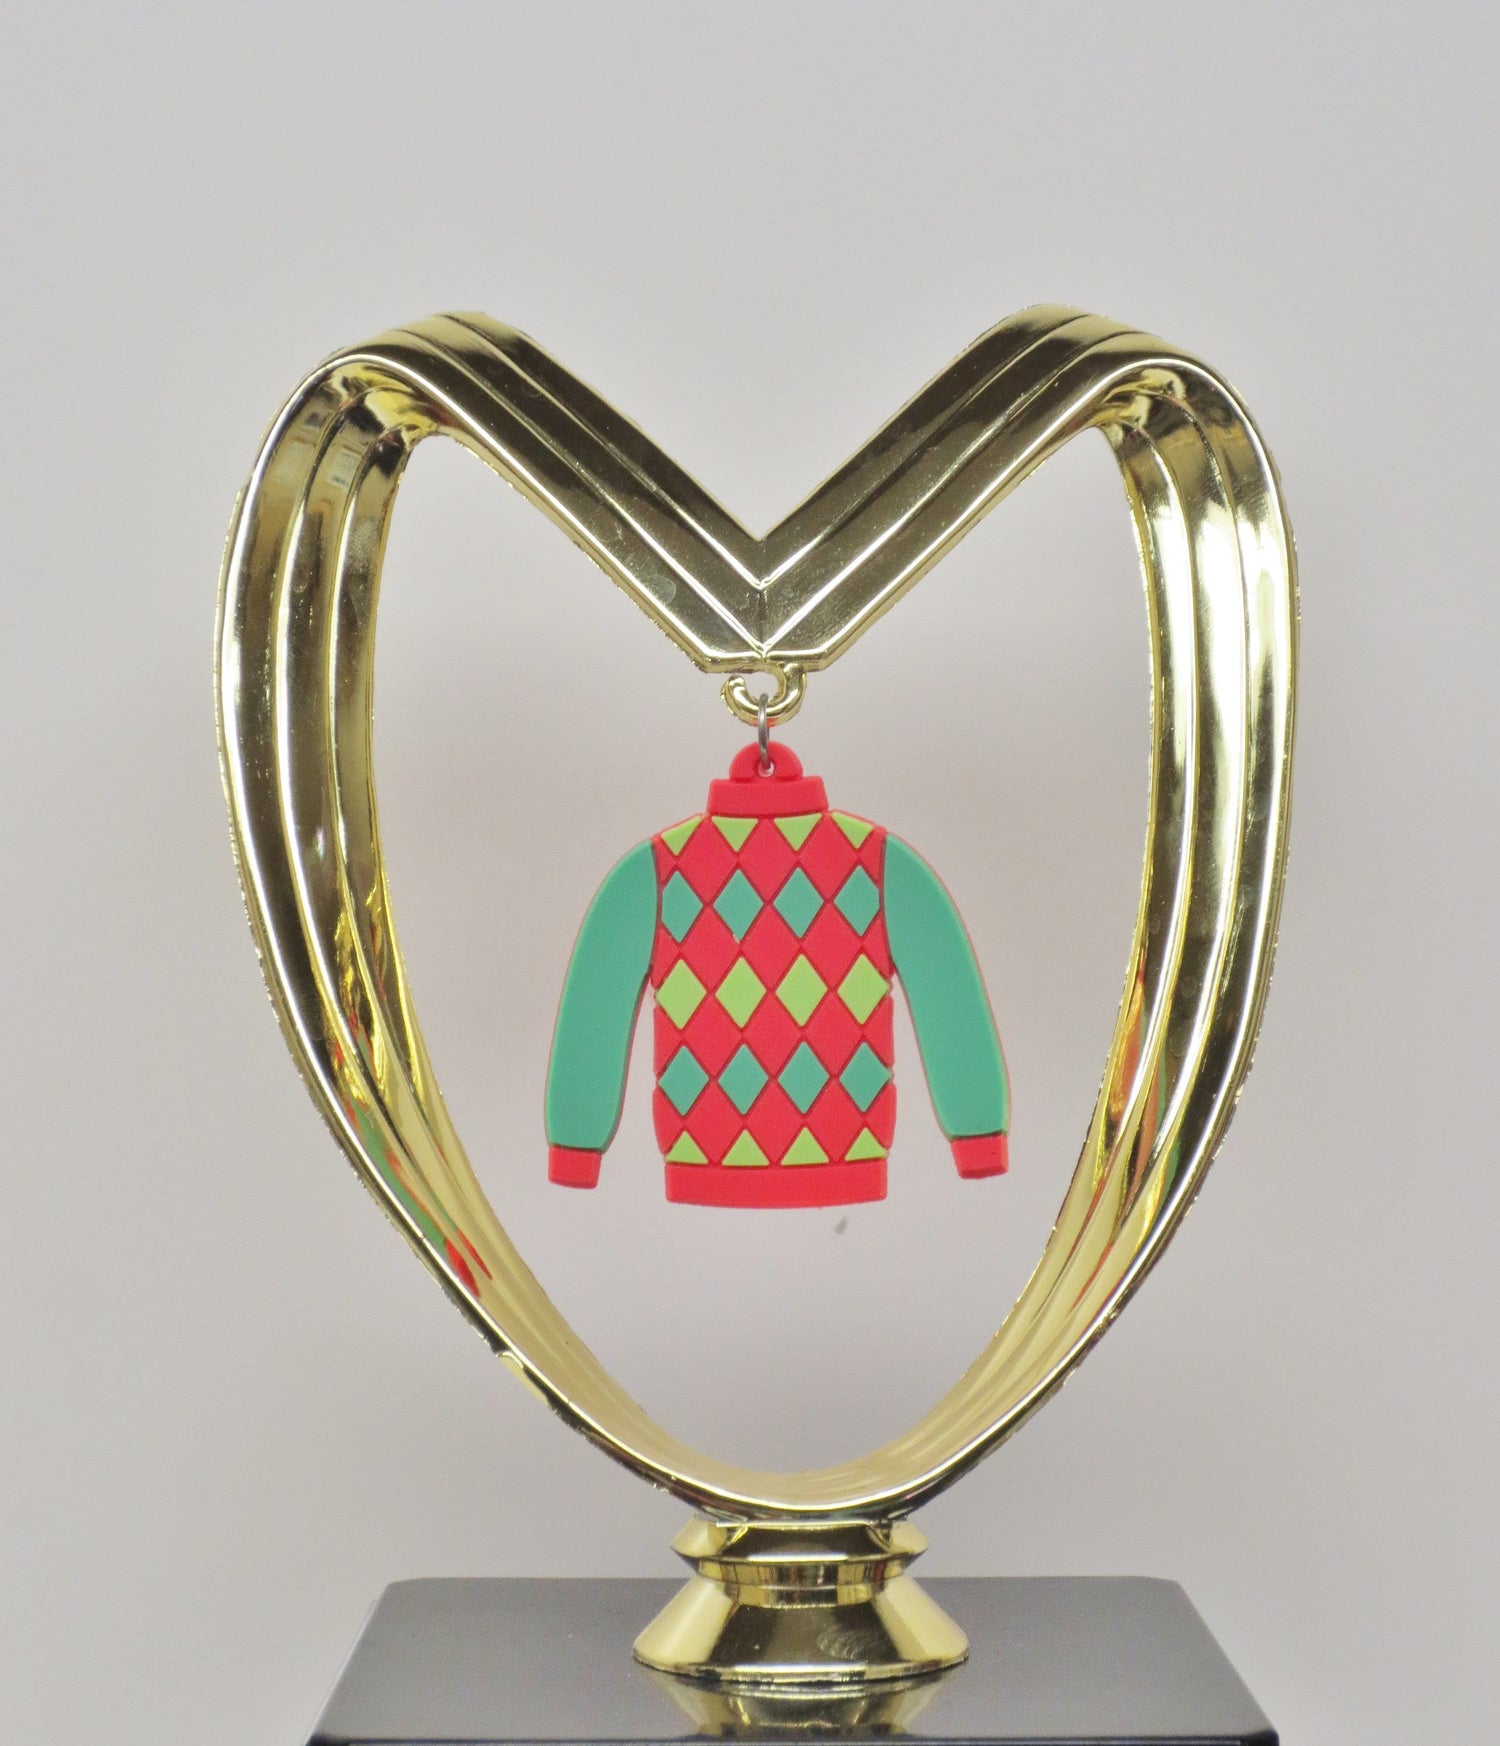 Ugly Sweater Trophy Contest Holiday Ugliest Sweater Red & Green Holiday Party Award Winner Holiday Christmas Trophy Decor Cookie Bake Off